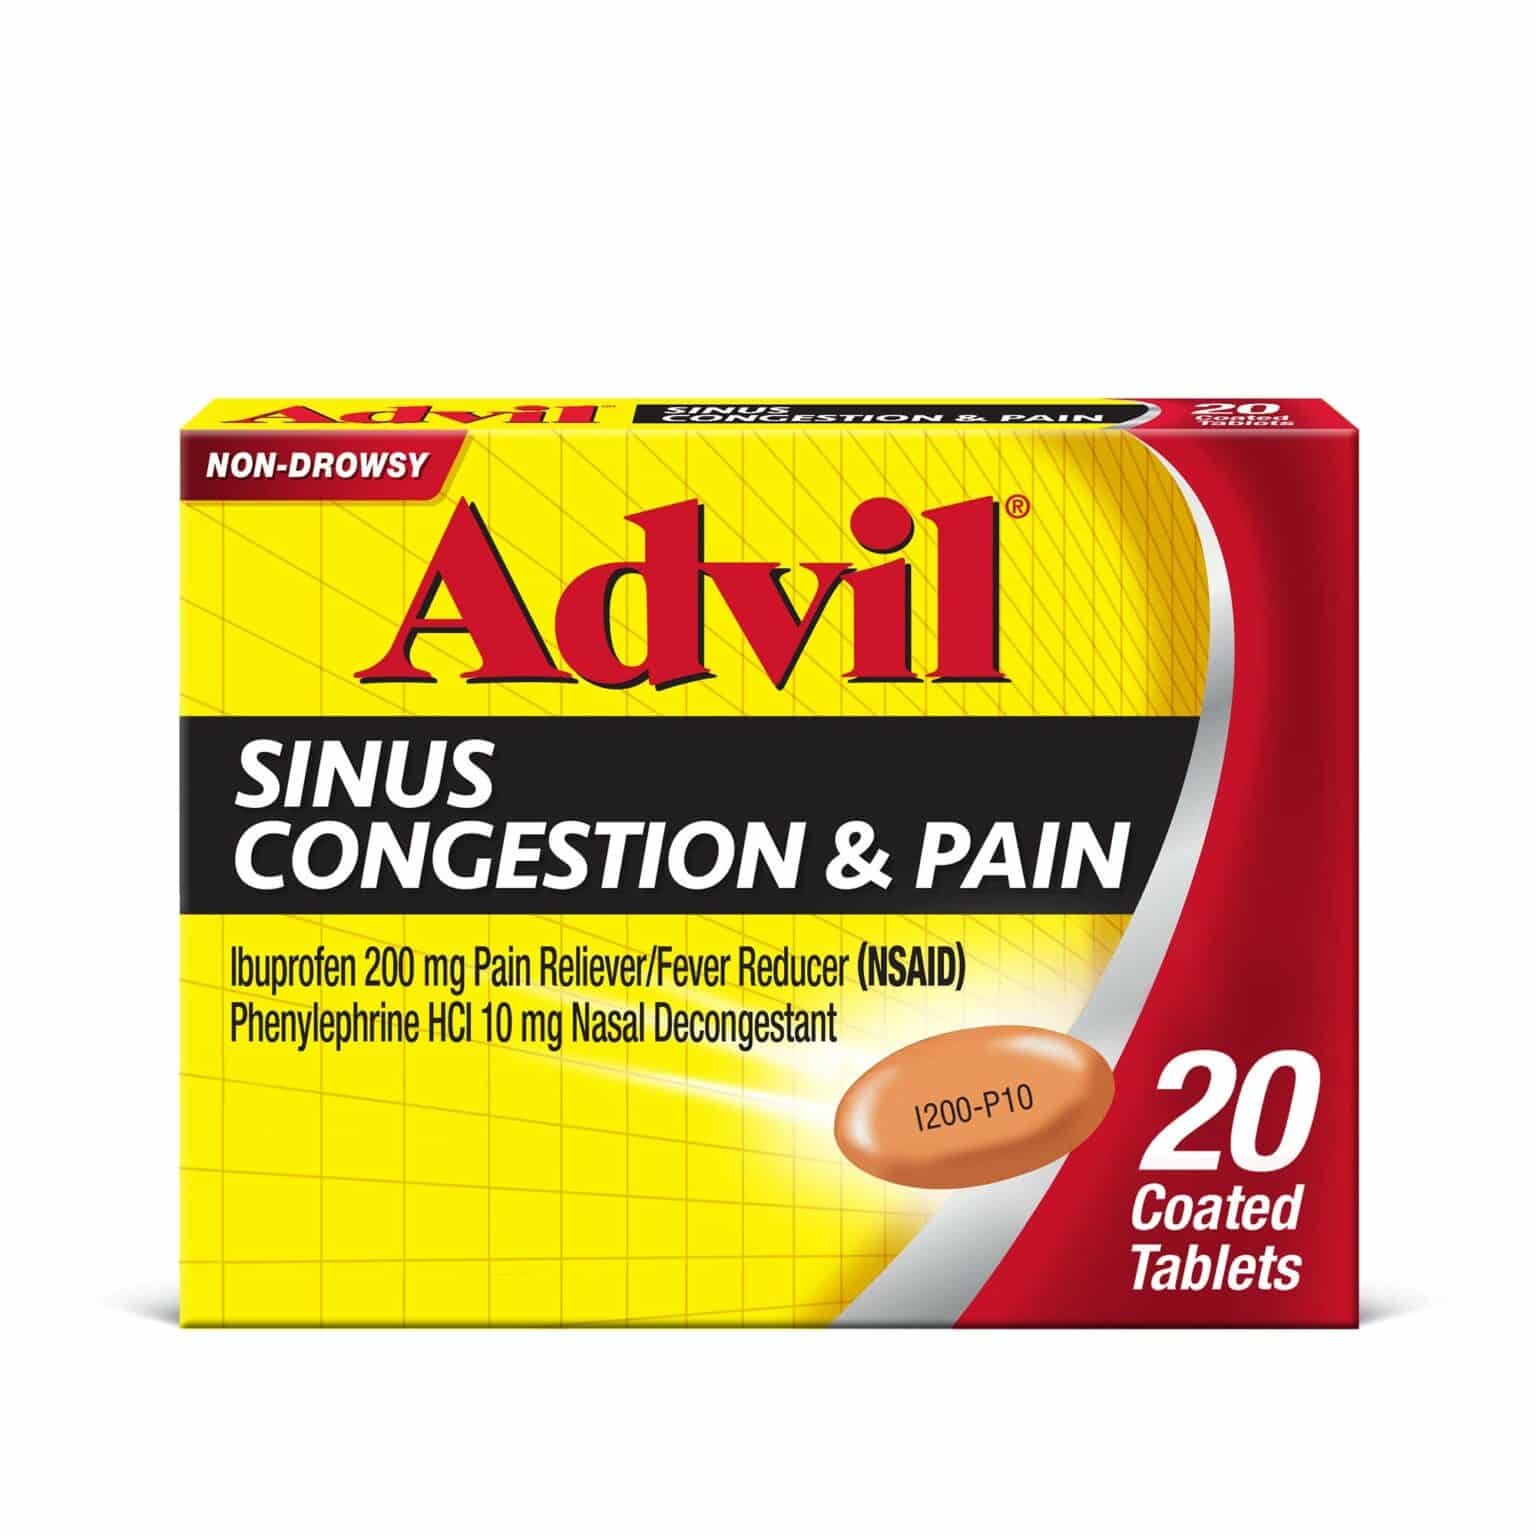 Advil Sinus Congestion &  Pain Relief (20 Count Packets), Non